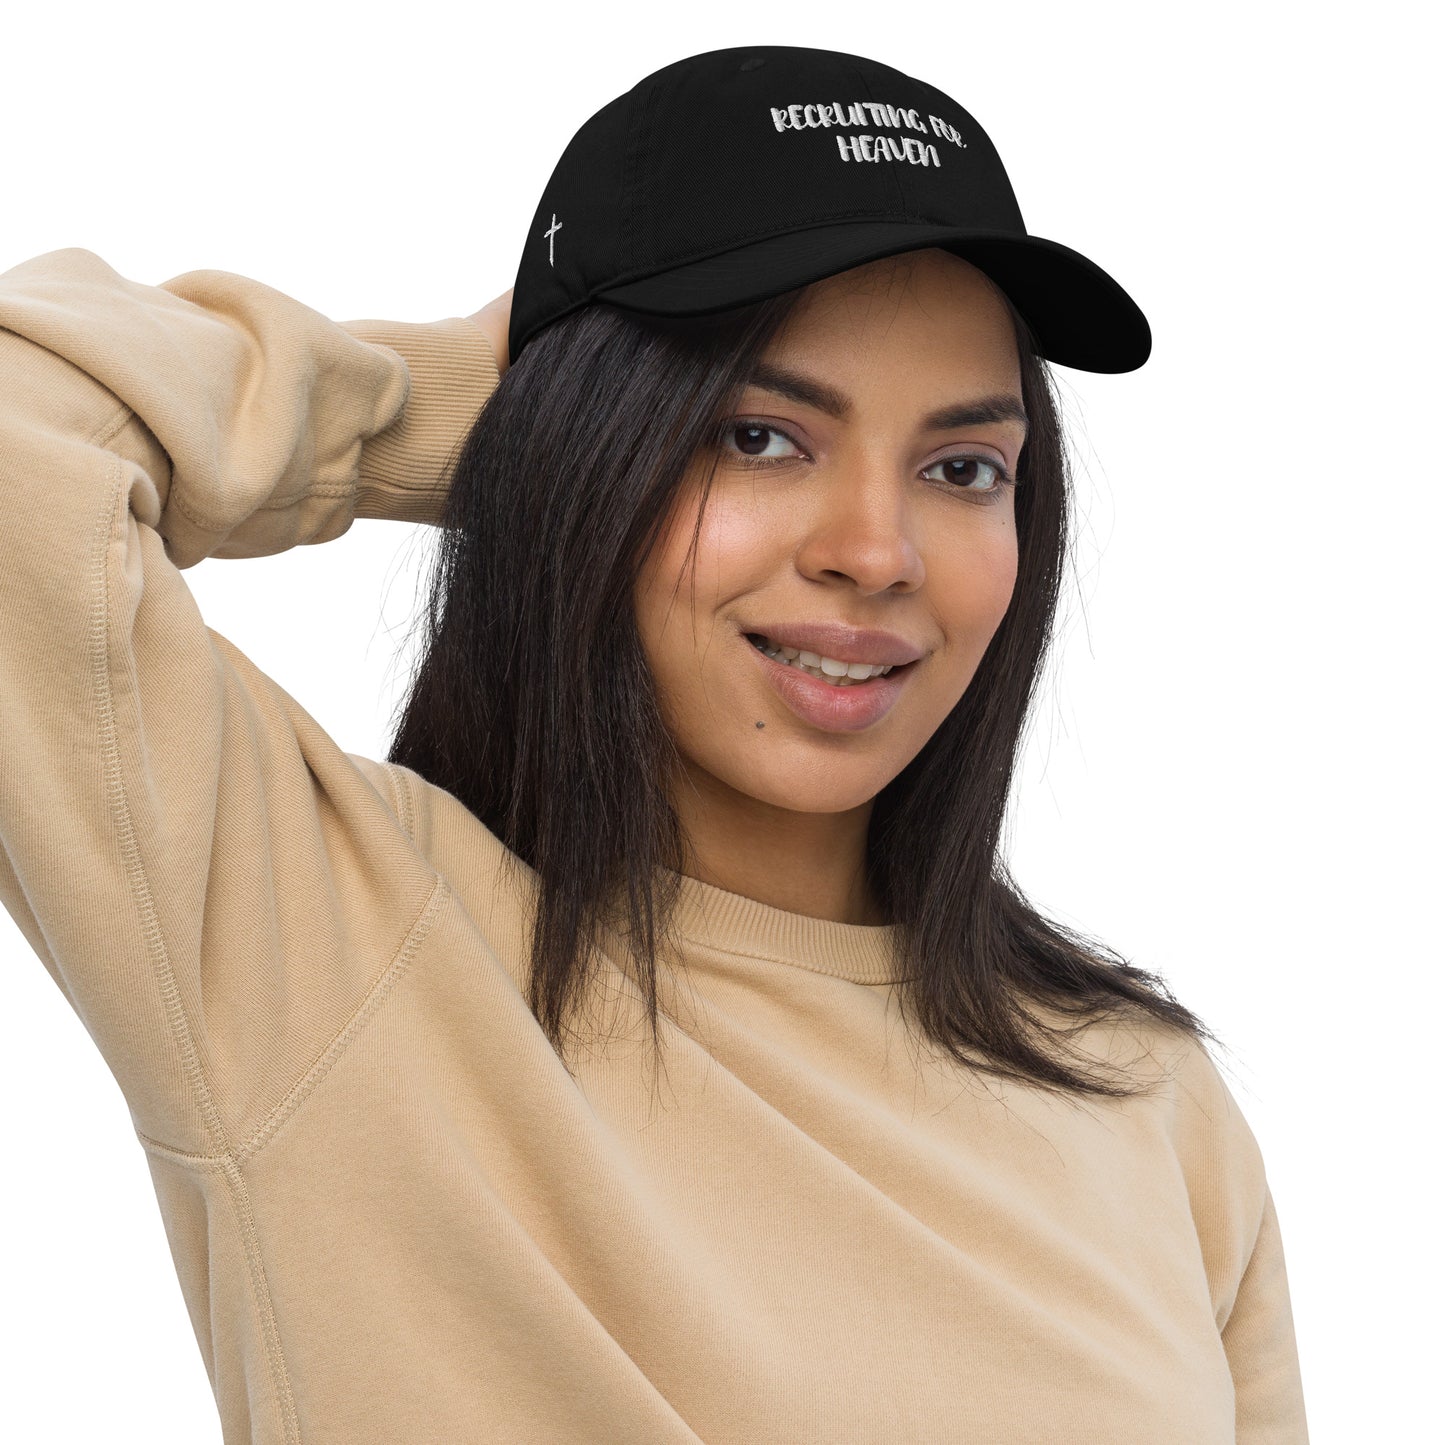 Recruiting for Heaven Dad Hat